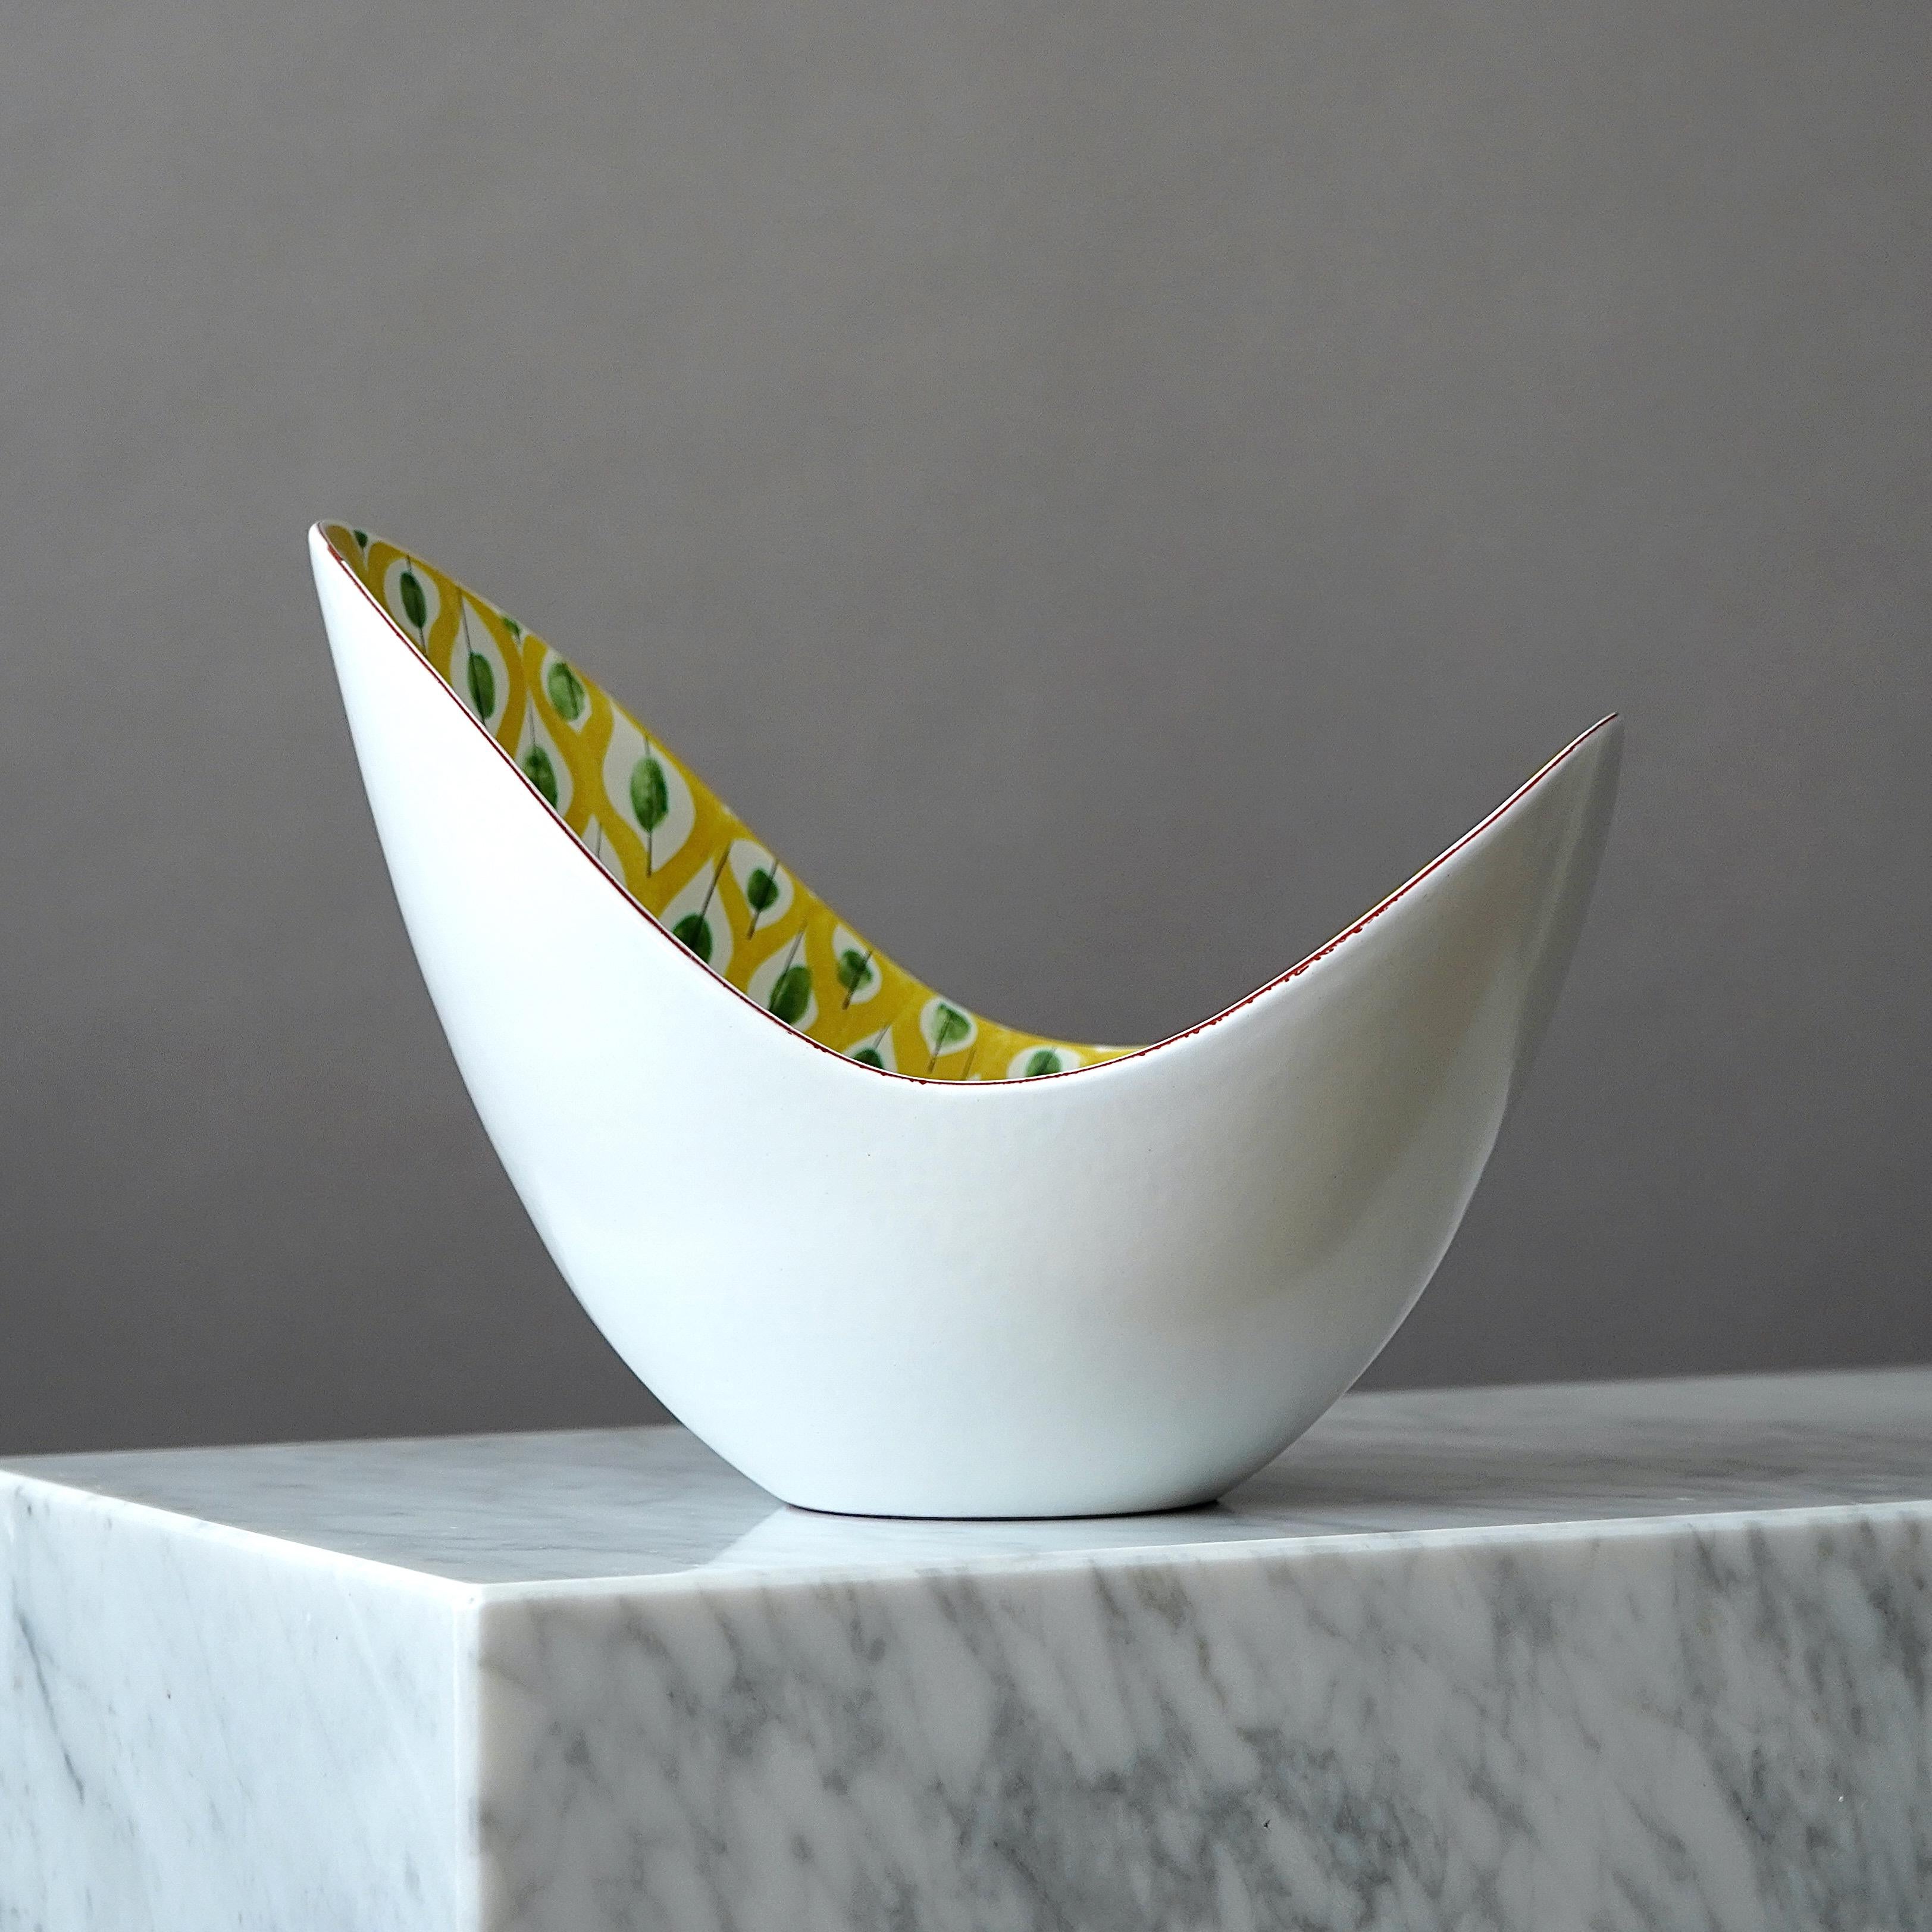 20th Century Large Faience Bowl by Stig Lindberg for Gustavsberg Studio, Sweden, 1950s For Sale